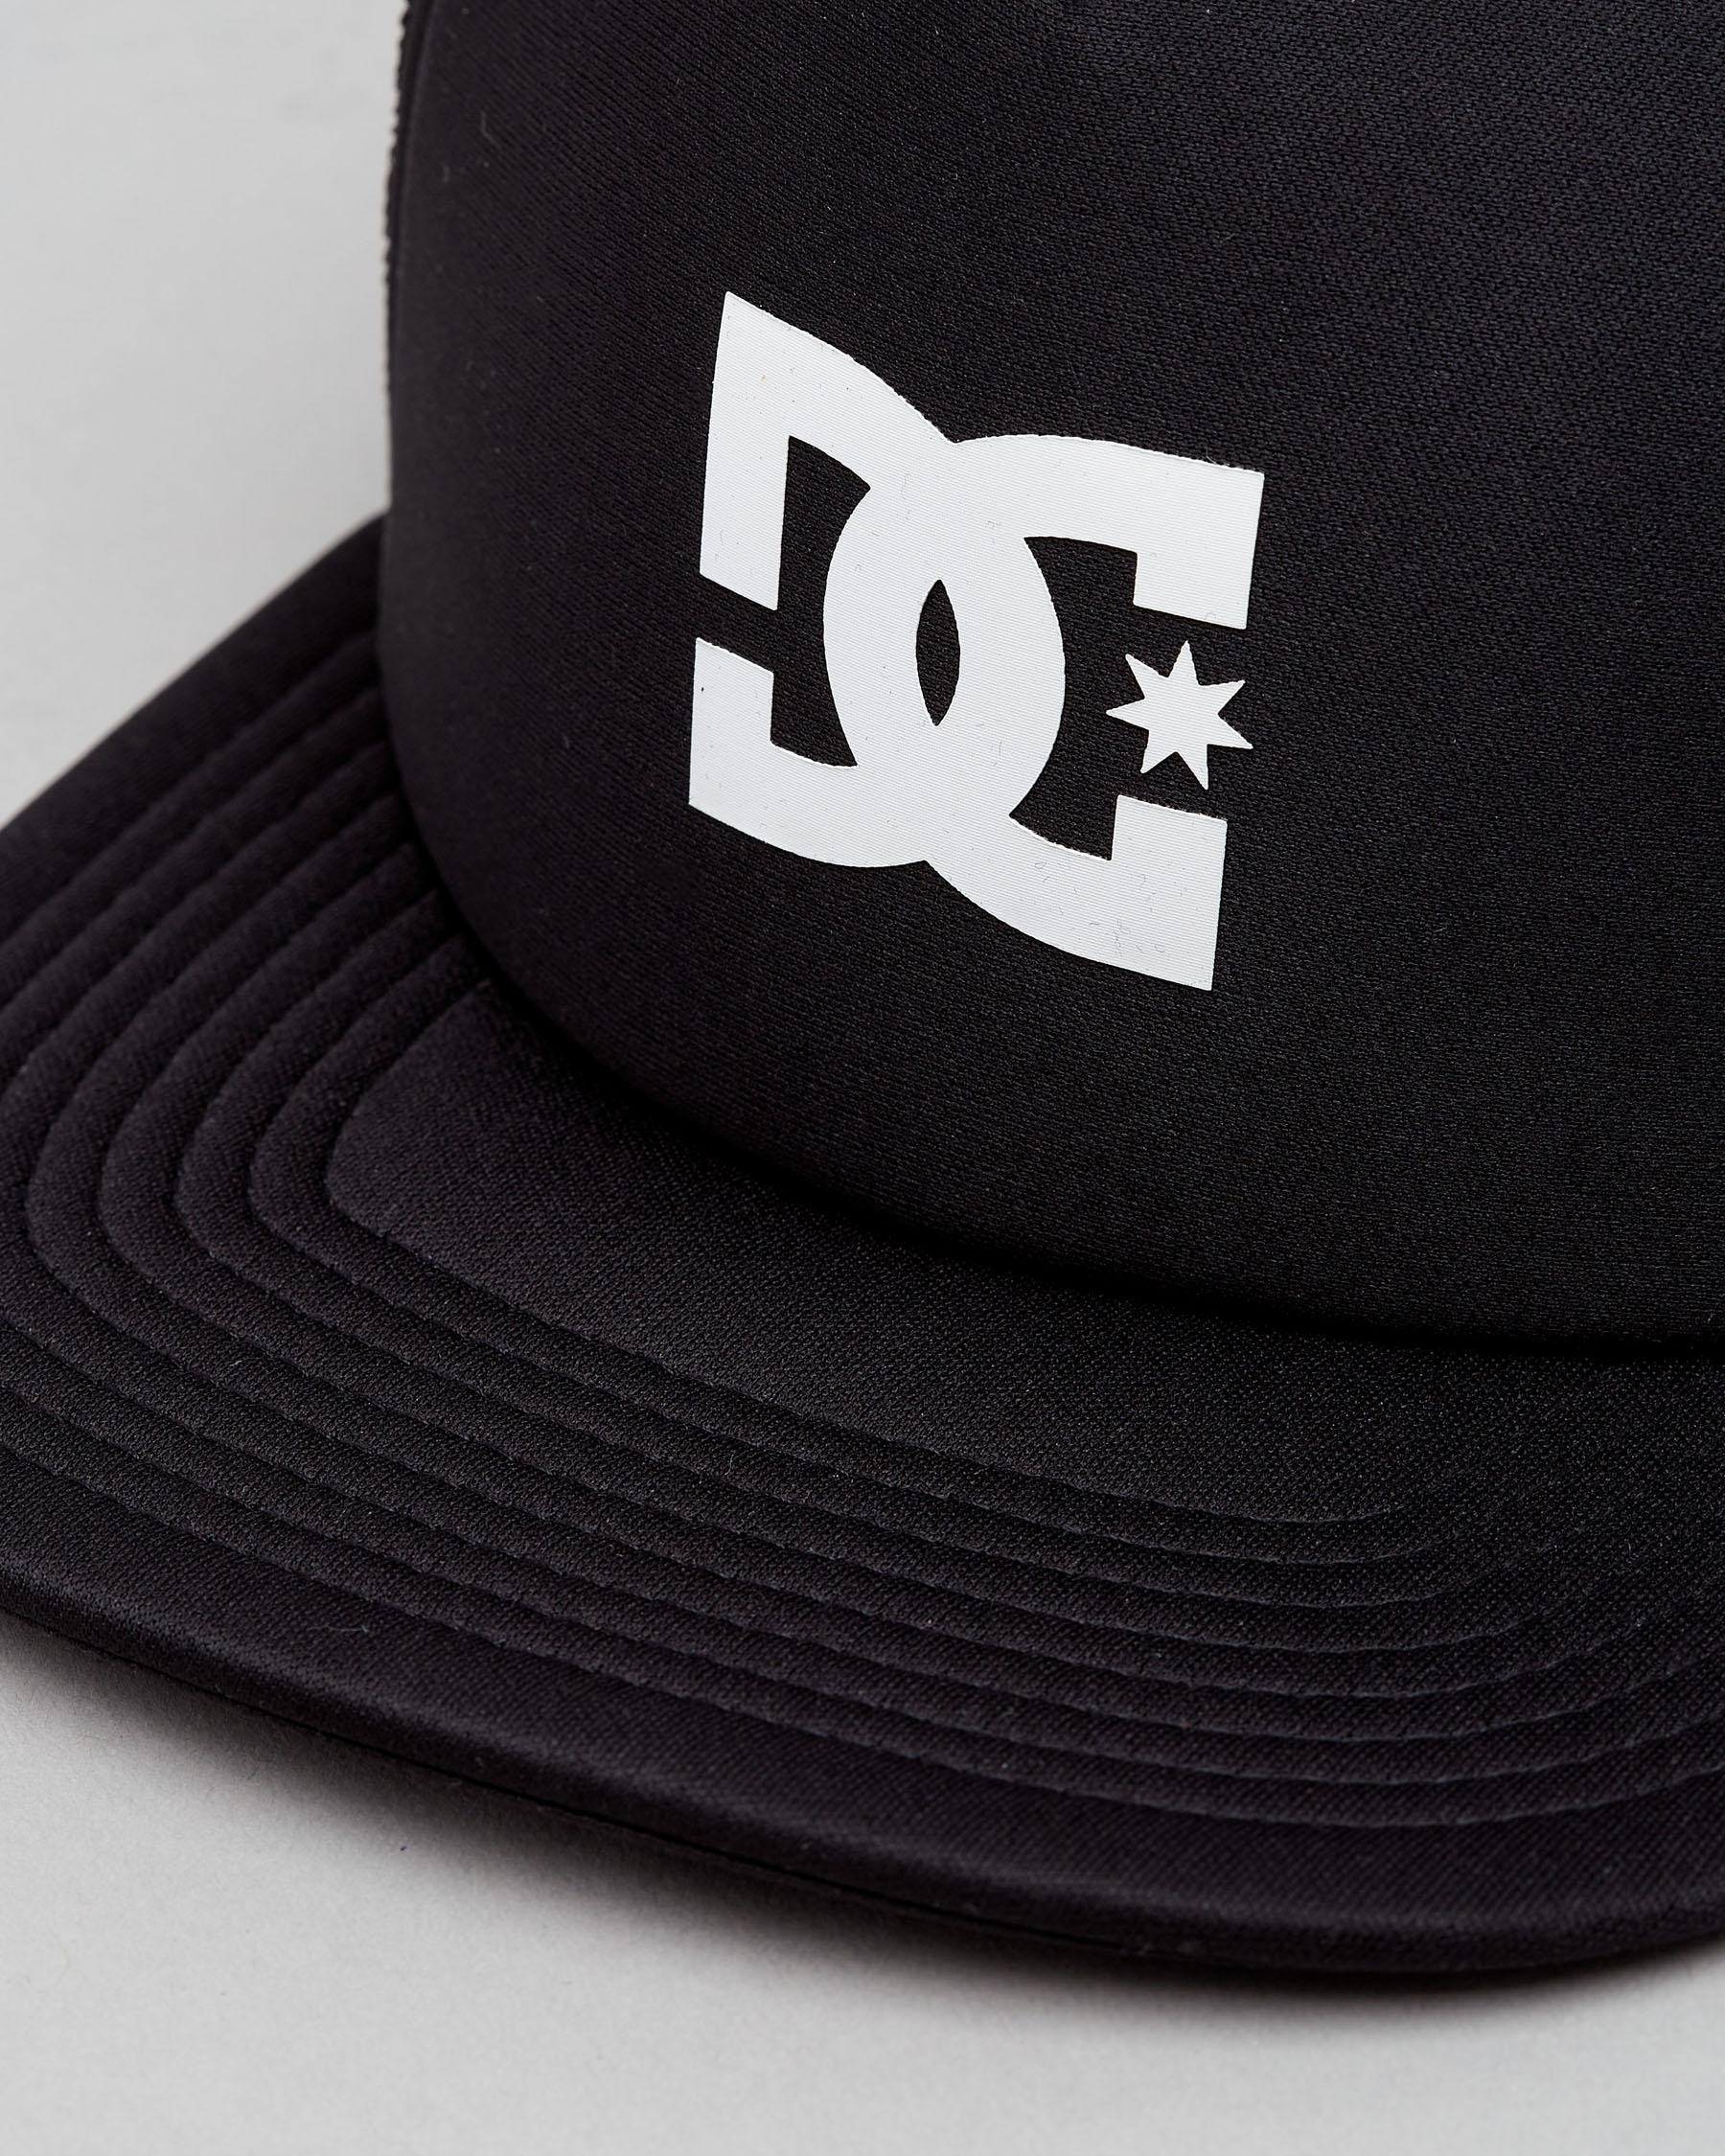 DC Shoes Gas Station - & Black Returns - Beach Easy United FREE* Shipping Trucker City States In Cap